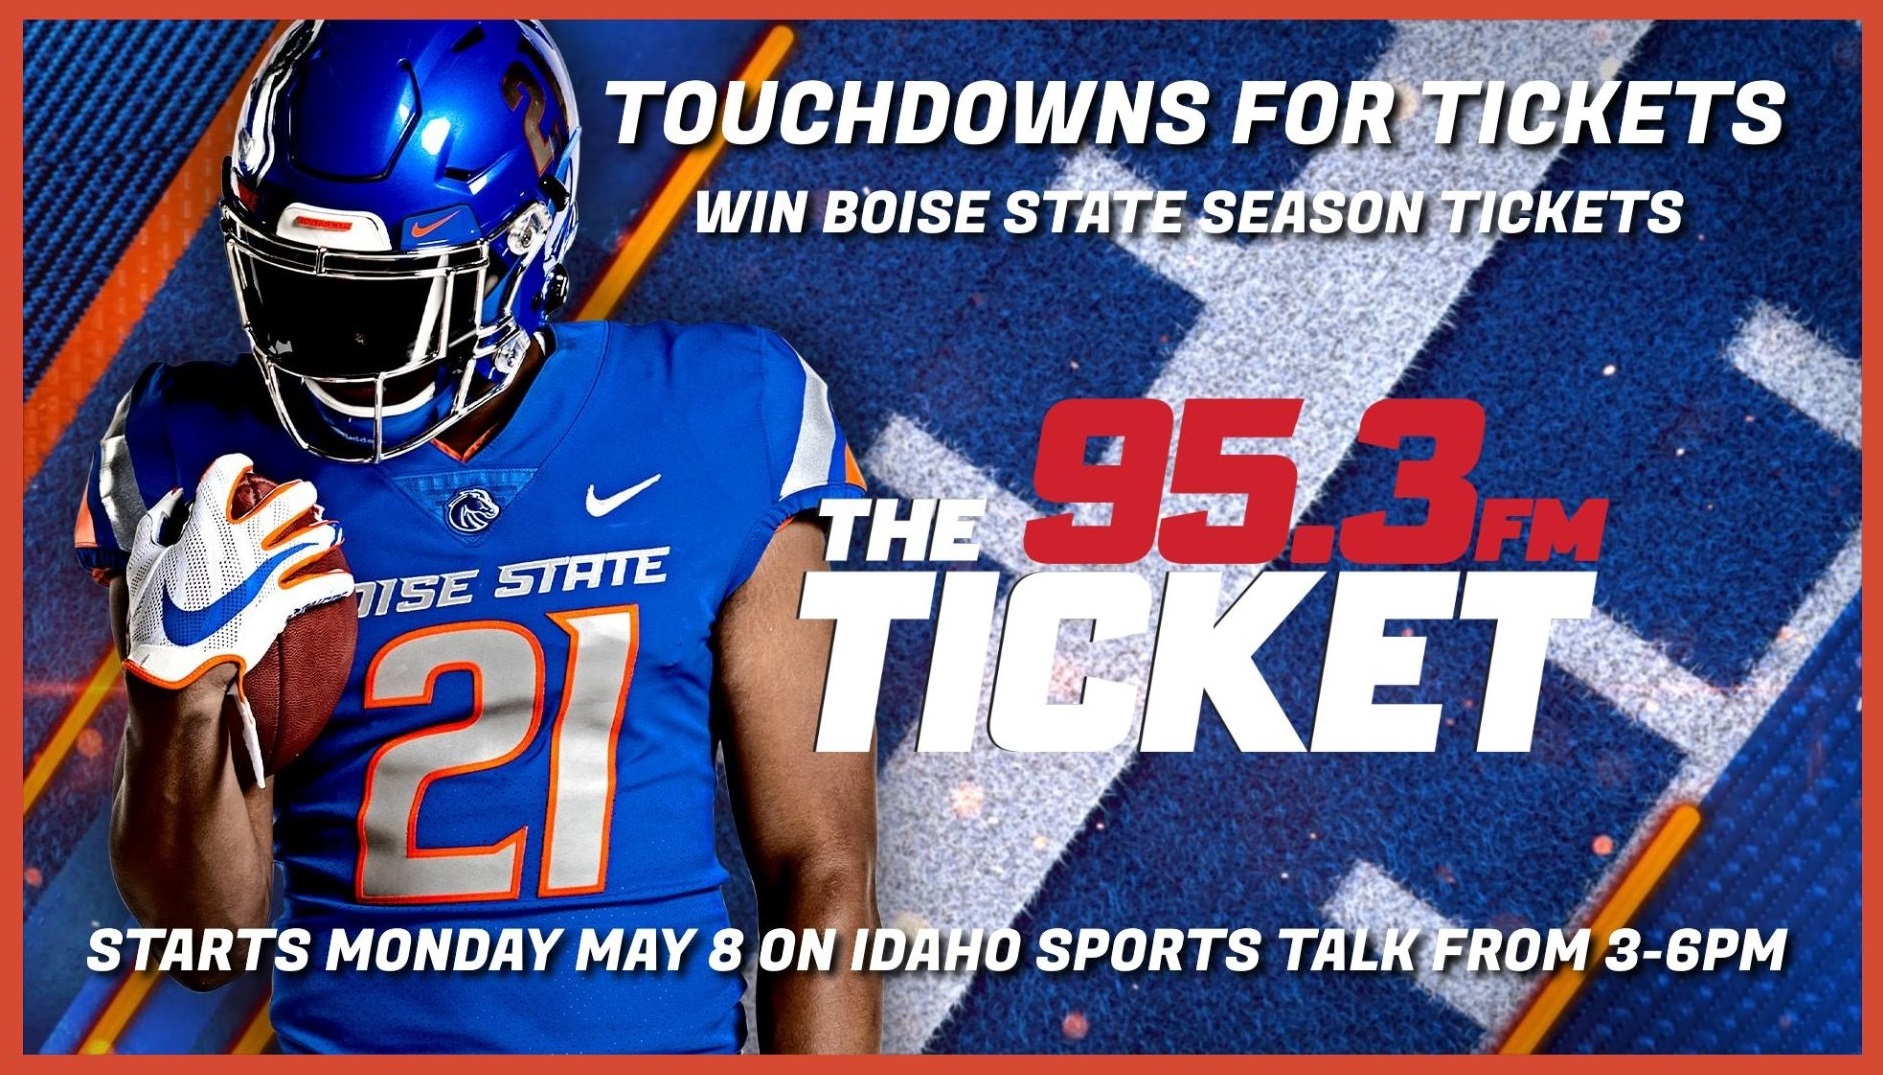 TOUCHDOWNS FOR TICKETS